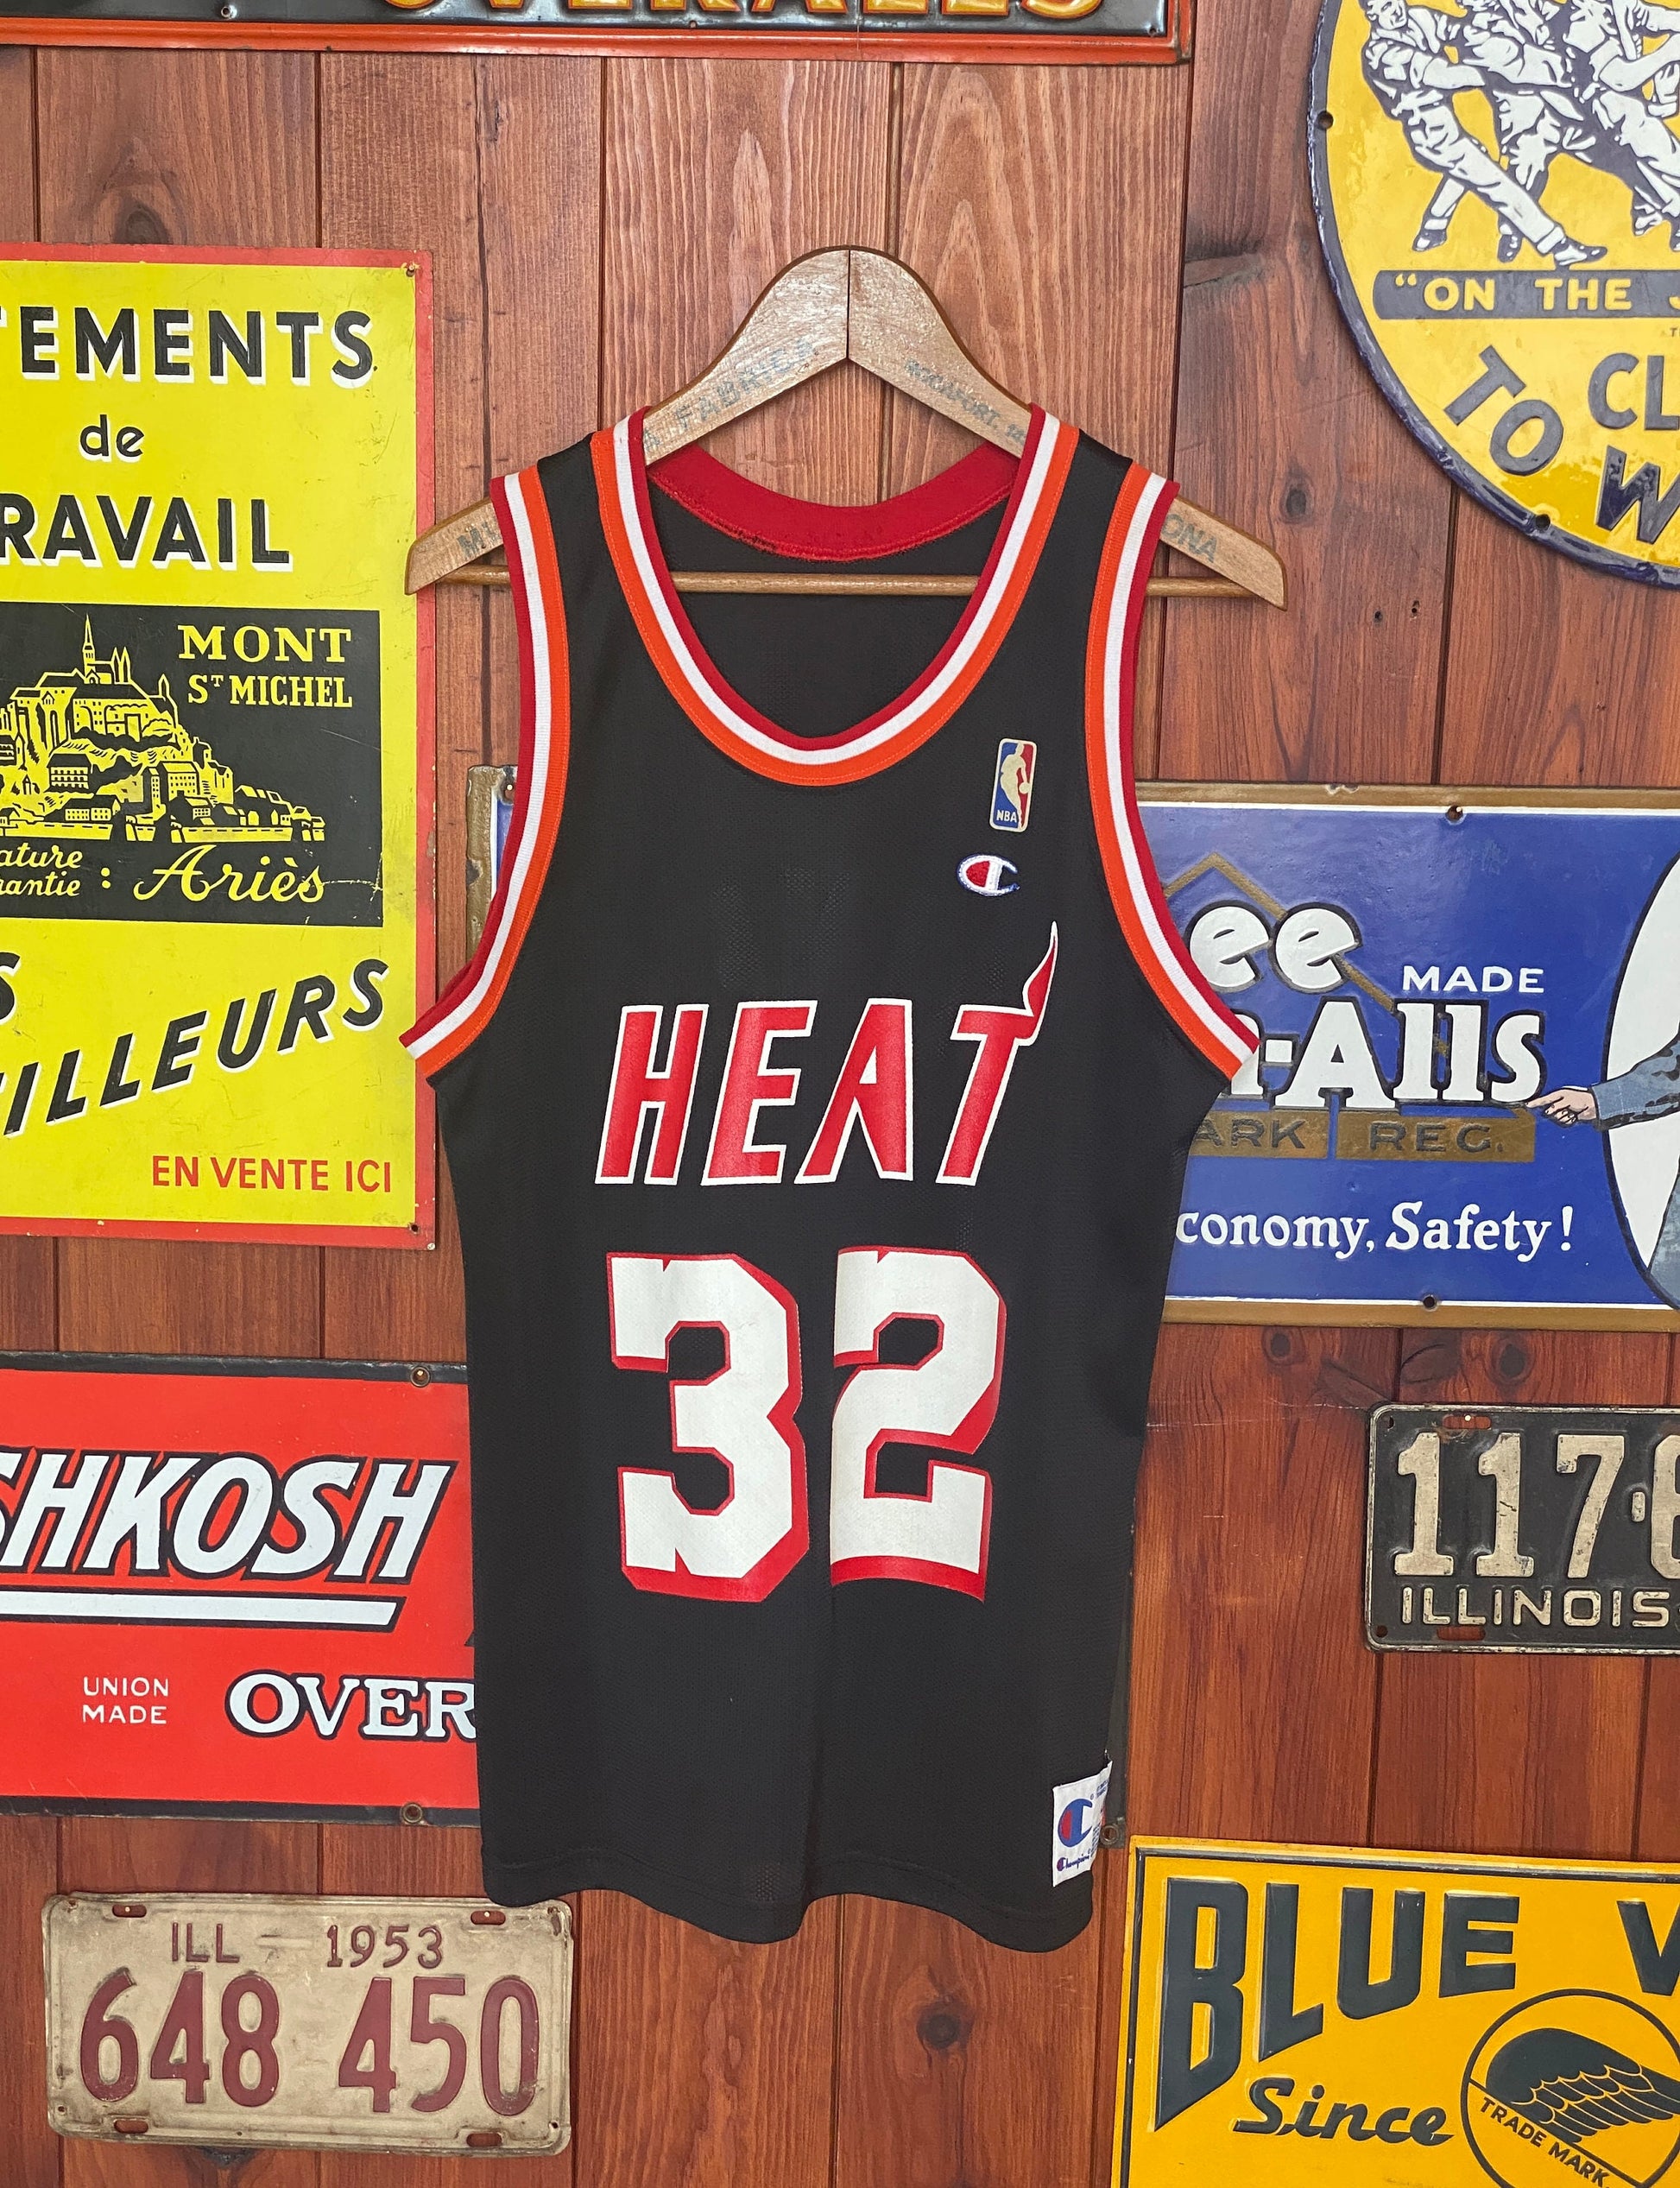 Vintage 90s Harold Miner NBA Jersey #32 Miami Heat - Size 40, Made in USA by Champion